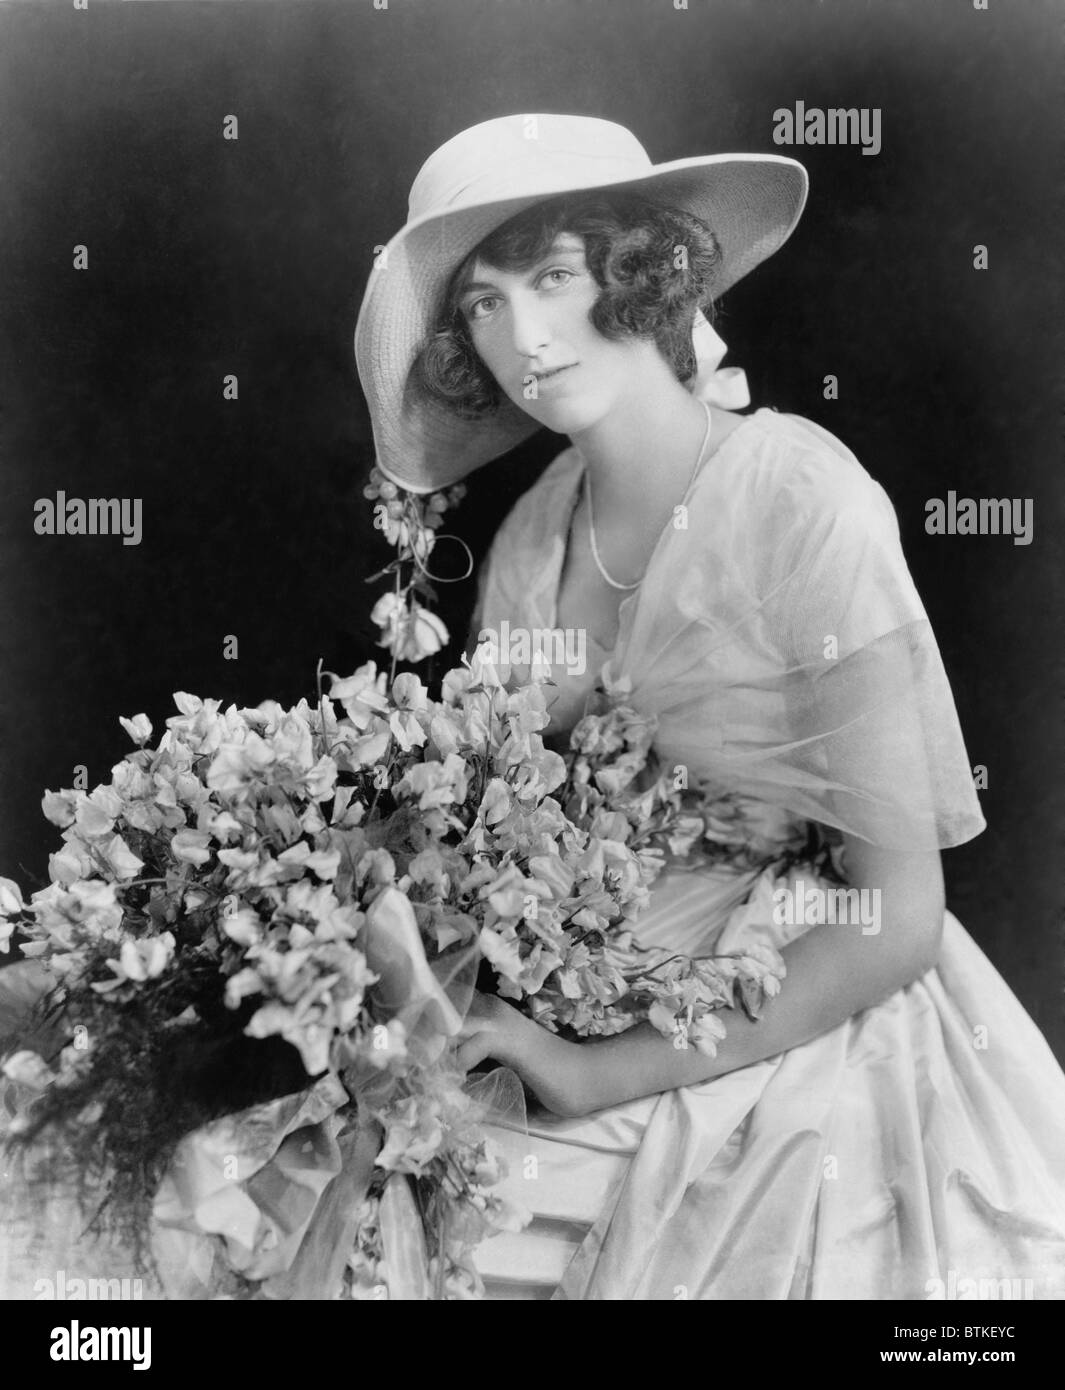 Cornelia Stuyvesant Vanderbilt (1900-1976), only child of George W. Vanderbilt and Edith Stuyvesant Dresser holding a bouquet of flowers on the announcement of her engagement to British diplomat, John Francis Amherst Cecil. The couple had two sons before their 1934 divorce. Stock Photo